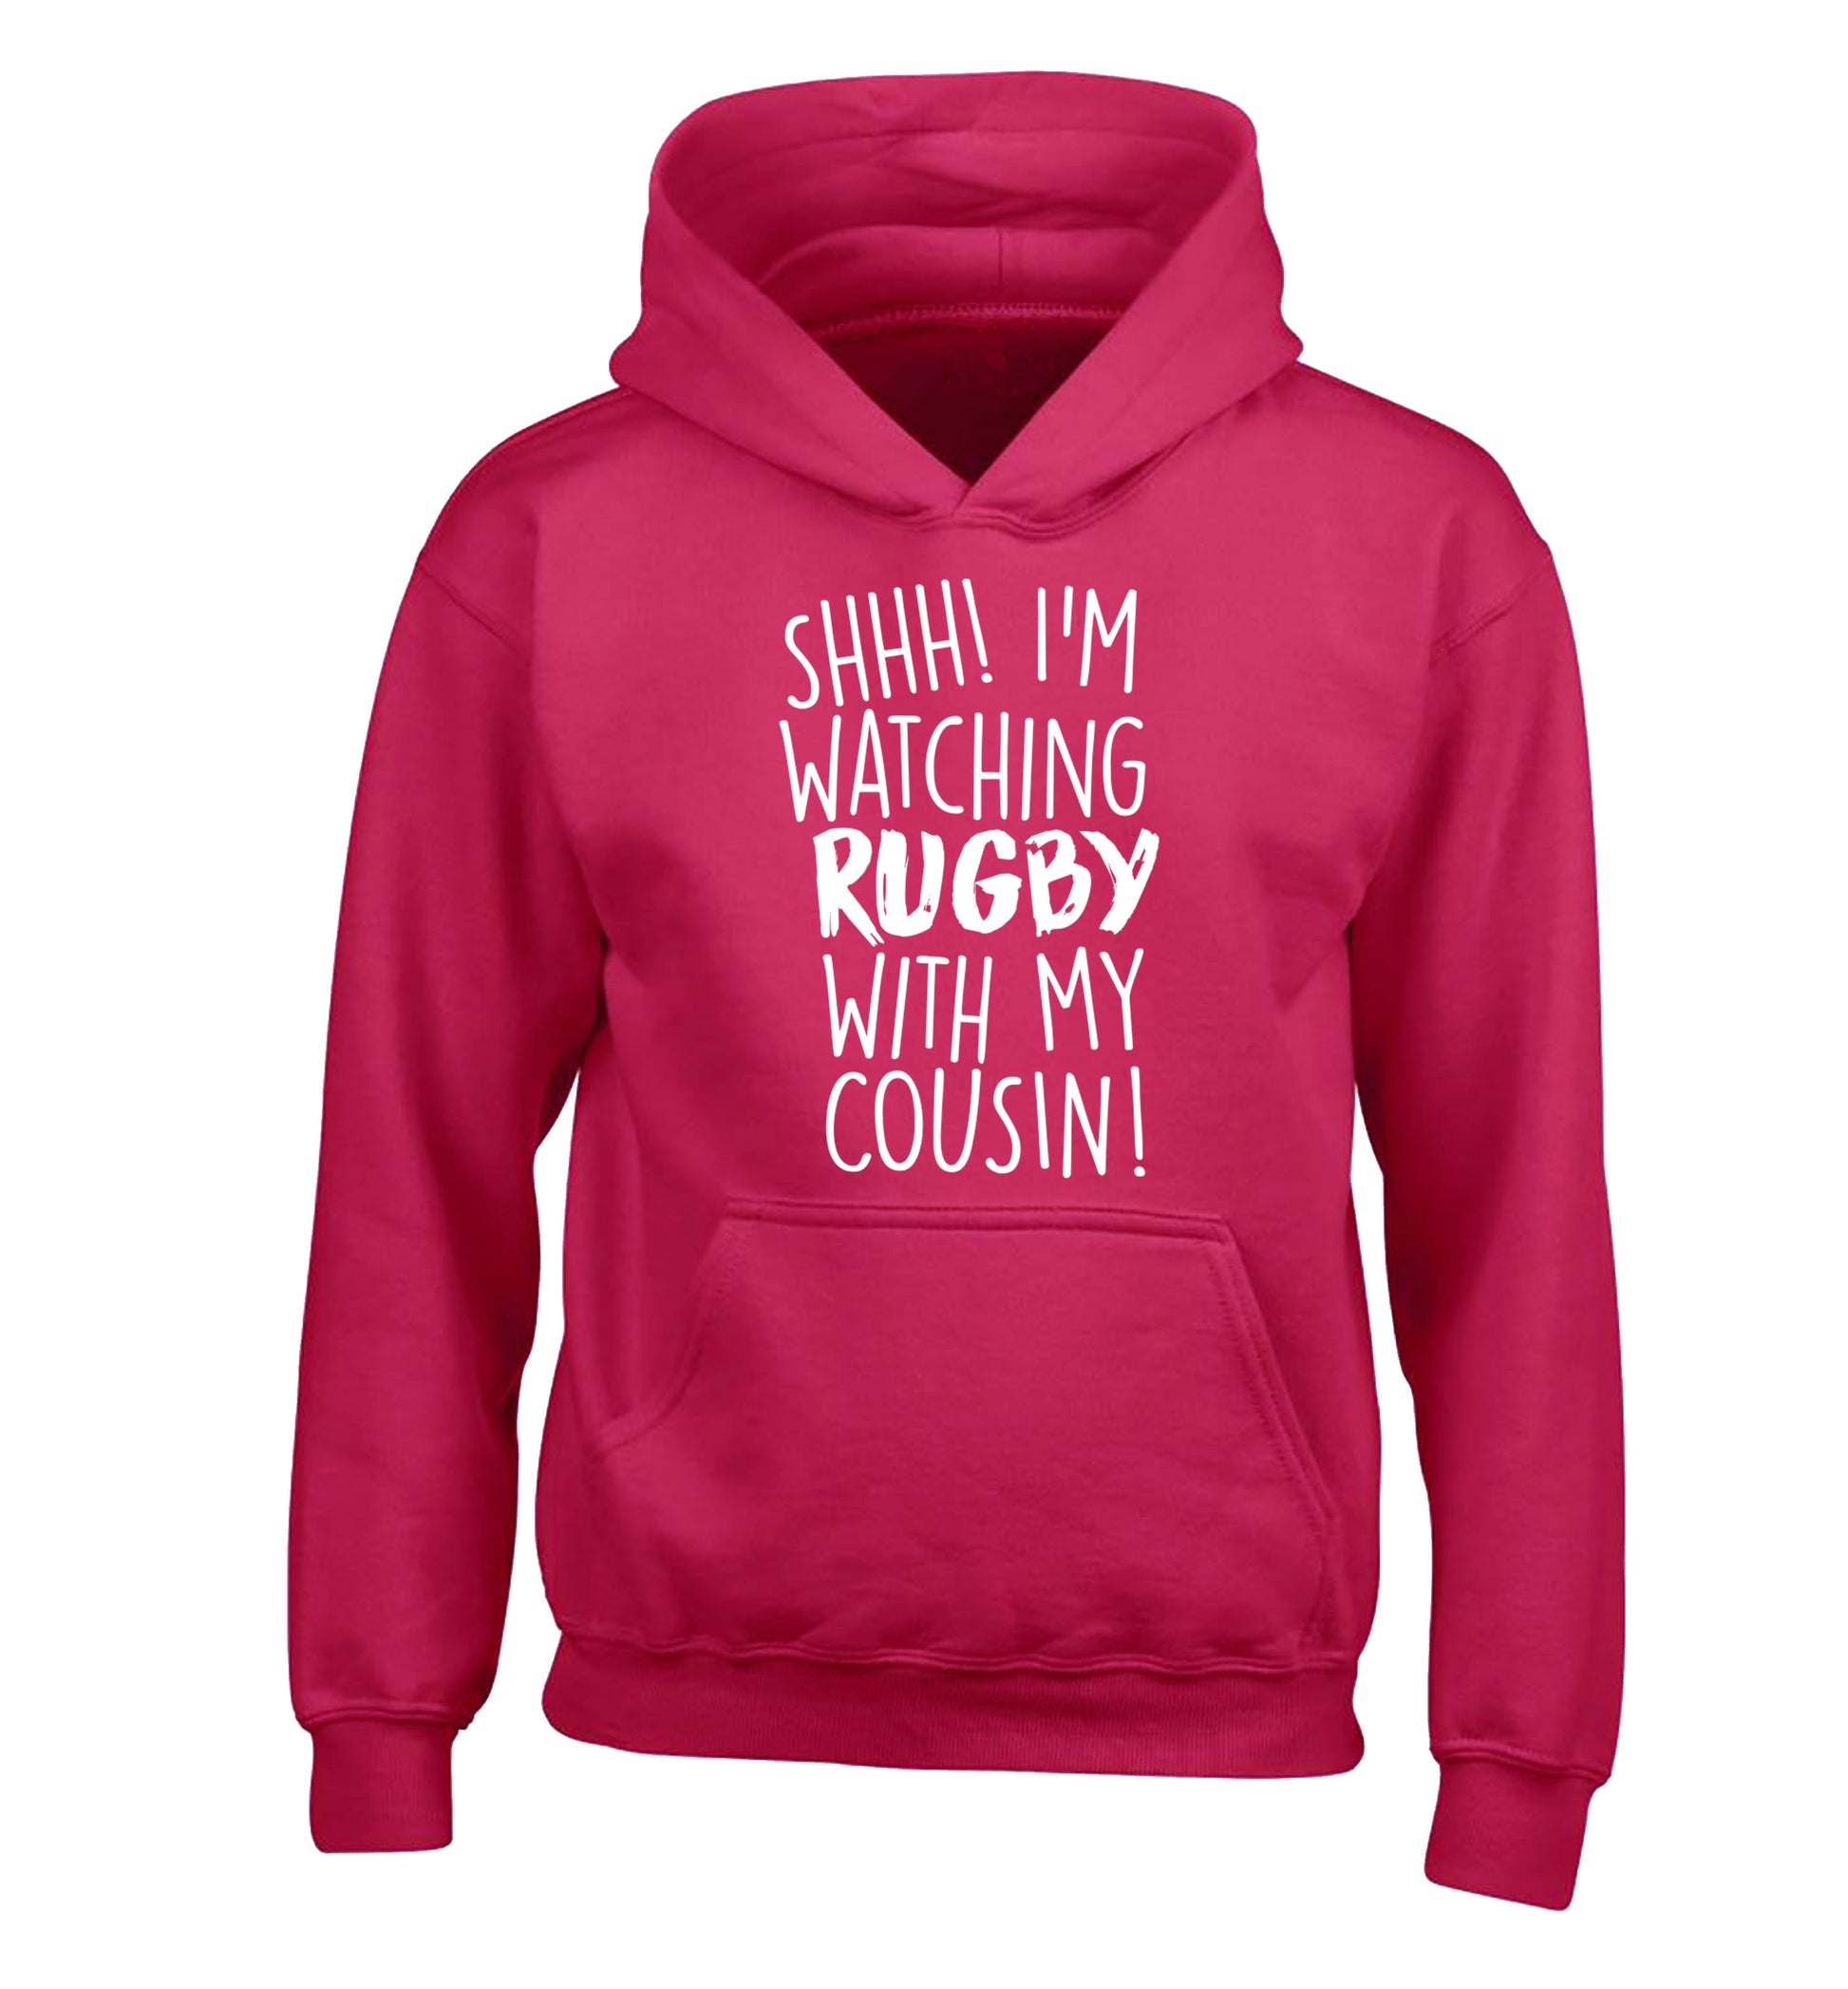 Shhh I'm watching rugby with my cousin children's pink hoodie 12-13 Years